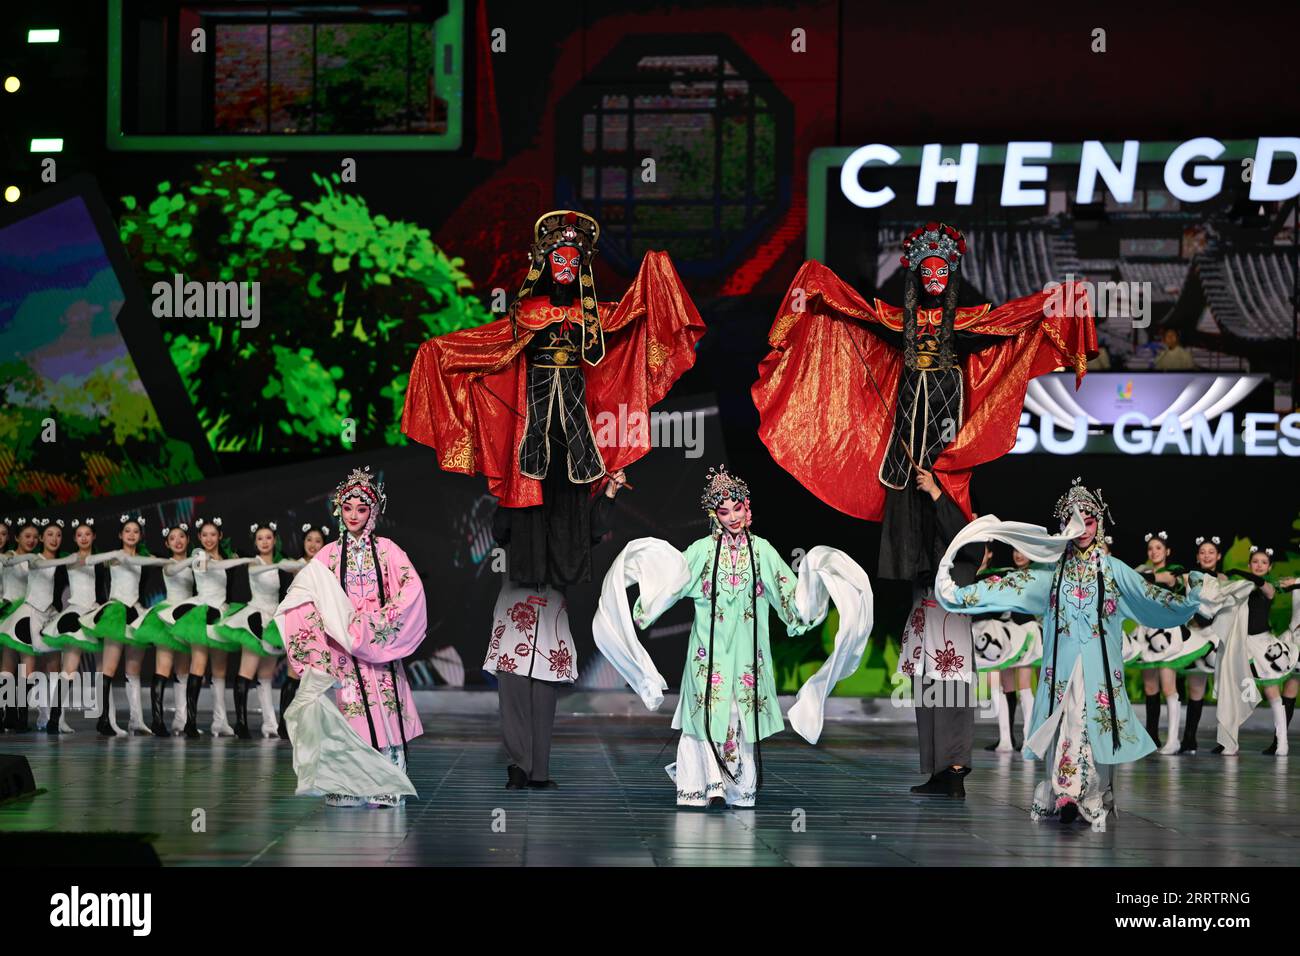 230808 -- CHENGDU, Aug. 8, 2023 -- A performance is held during the closing ceremony of the 31st FISU Summer World University Games in Chengdu, southwest China s Sichuan Province, Aug. 8, 2023.  Chengdu UniversiadeCHINA-CHENGDU-WORLD UNIVERSITY GAMES-CLOSING CEREMONY CN ZhangxLong PUBLICATIONxNOTxINxCHN Stock Photo